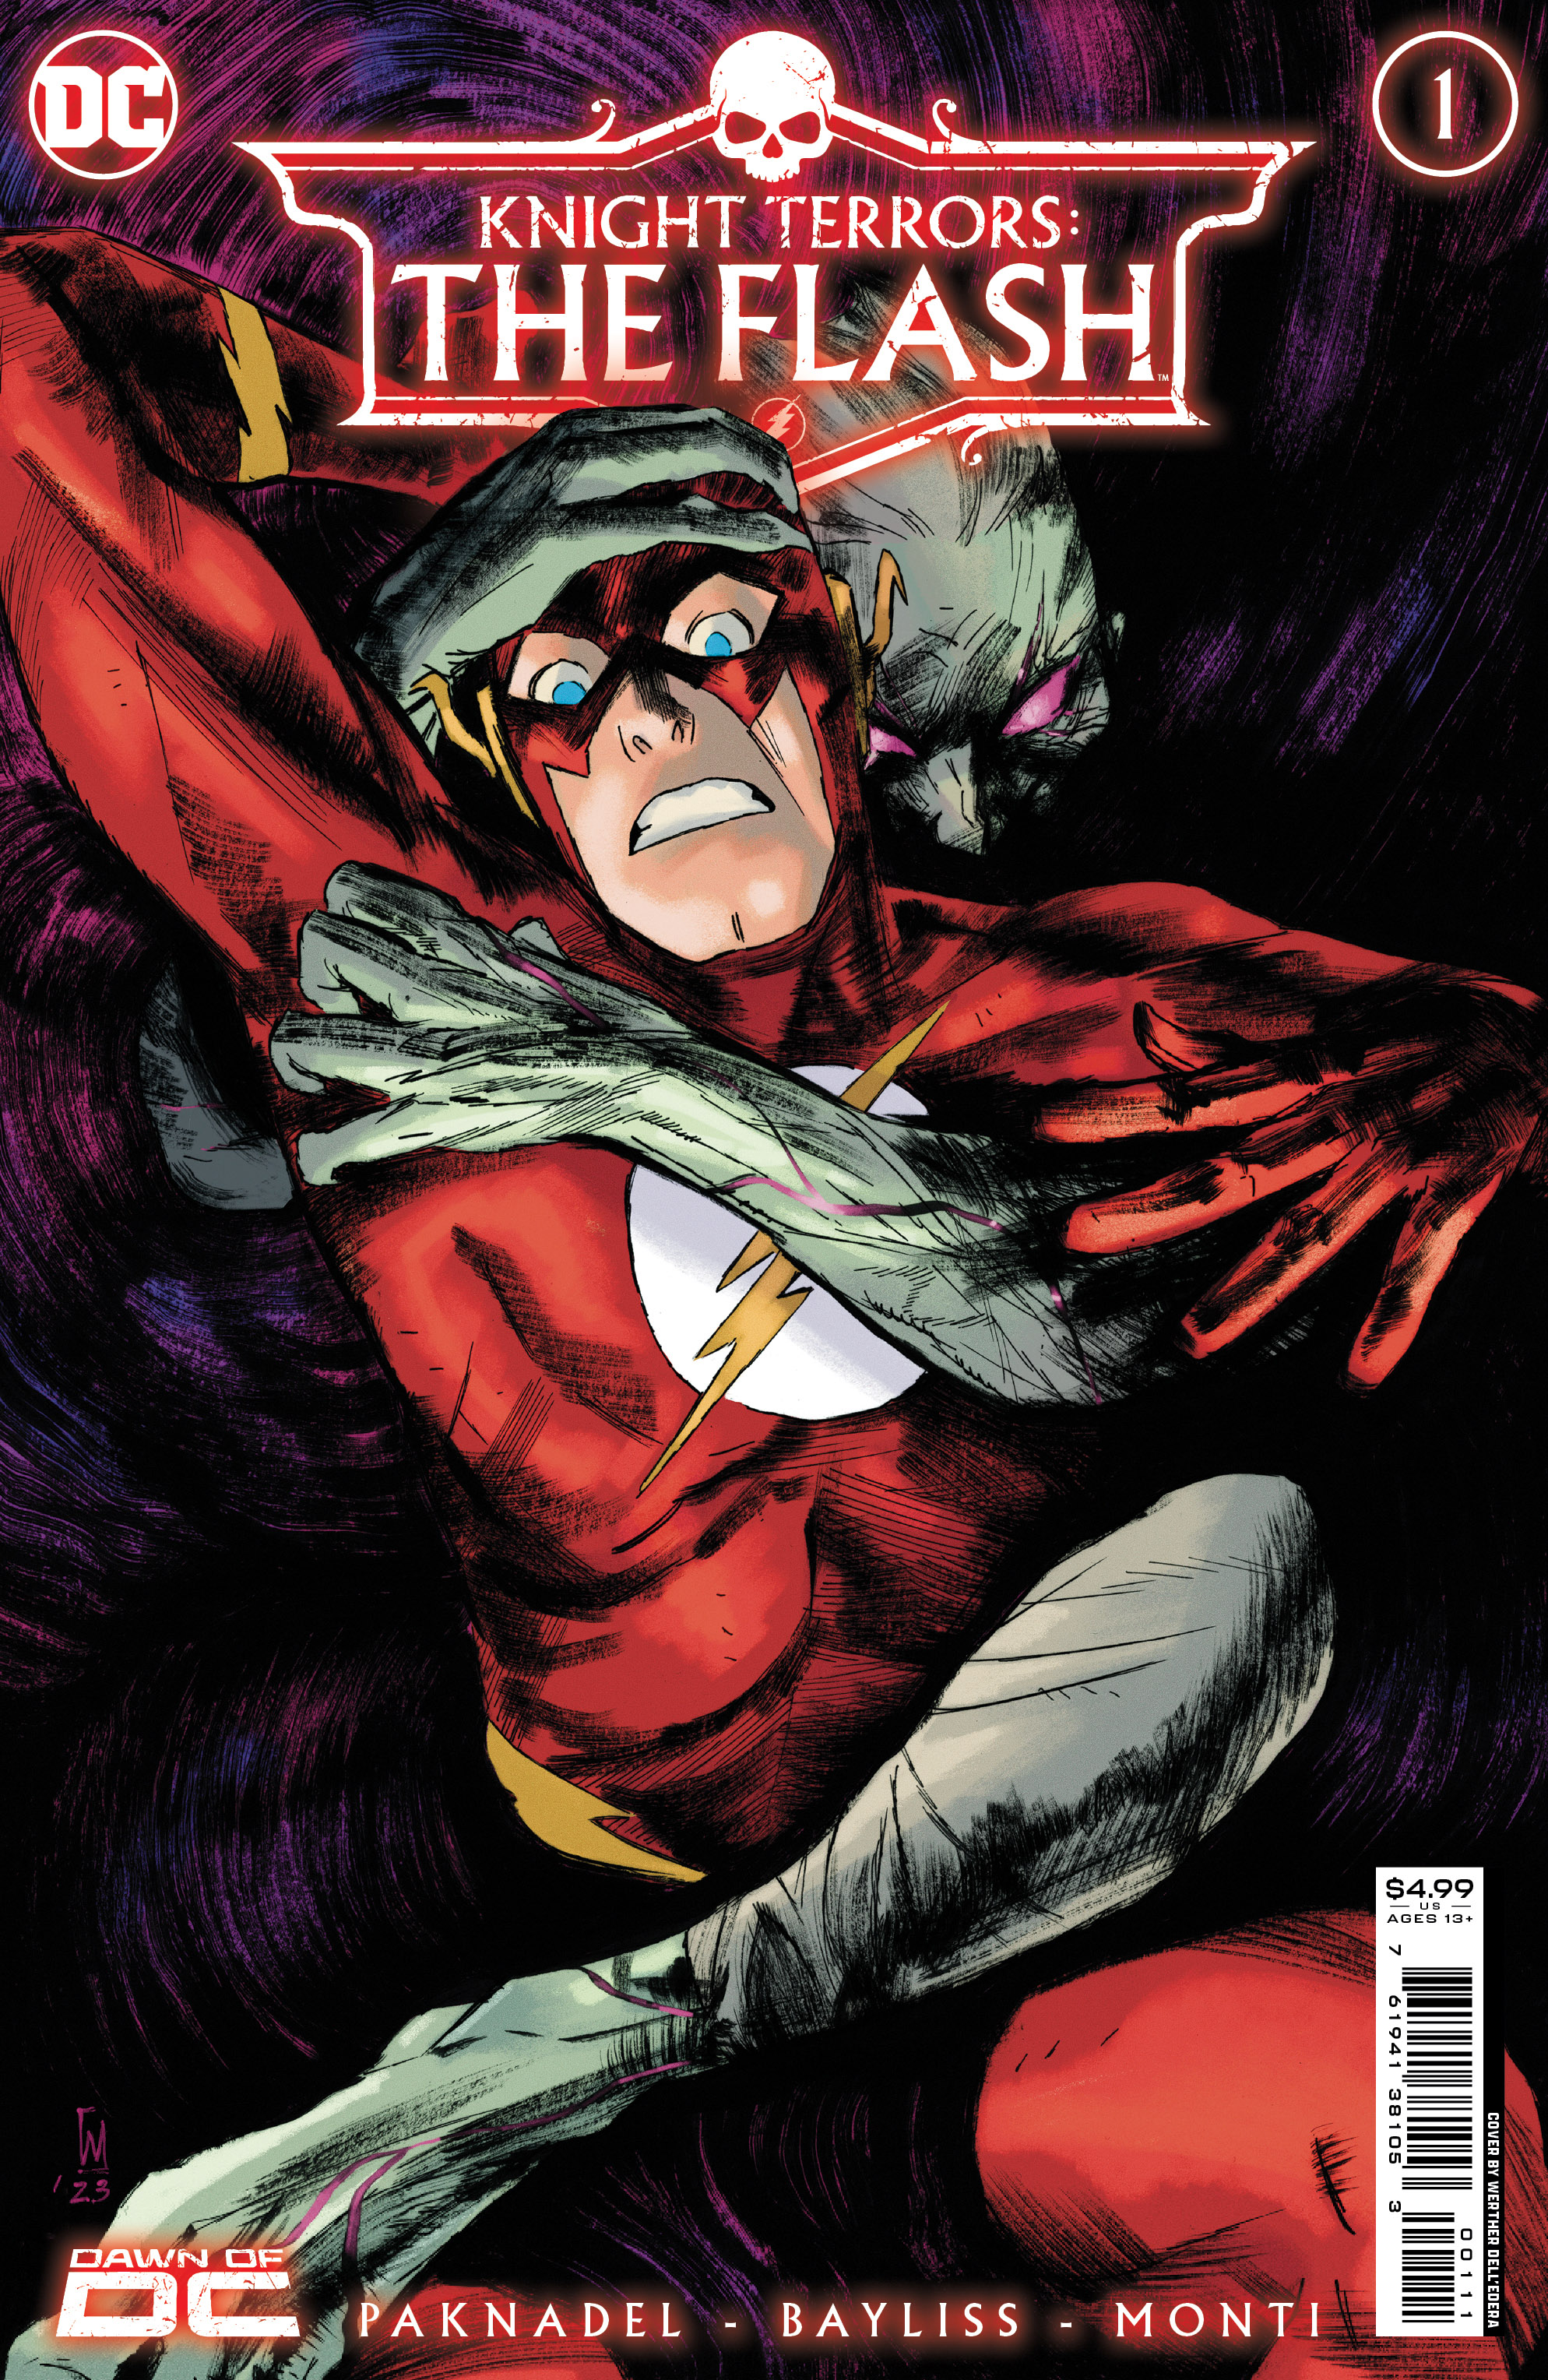 Flash #800.1 Knight Terrors #1 Cover A Werther Dell Edera (Of 2)